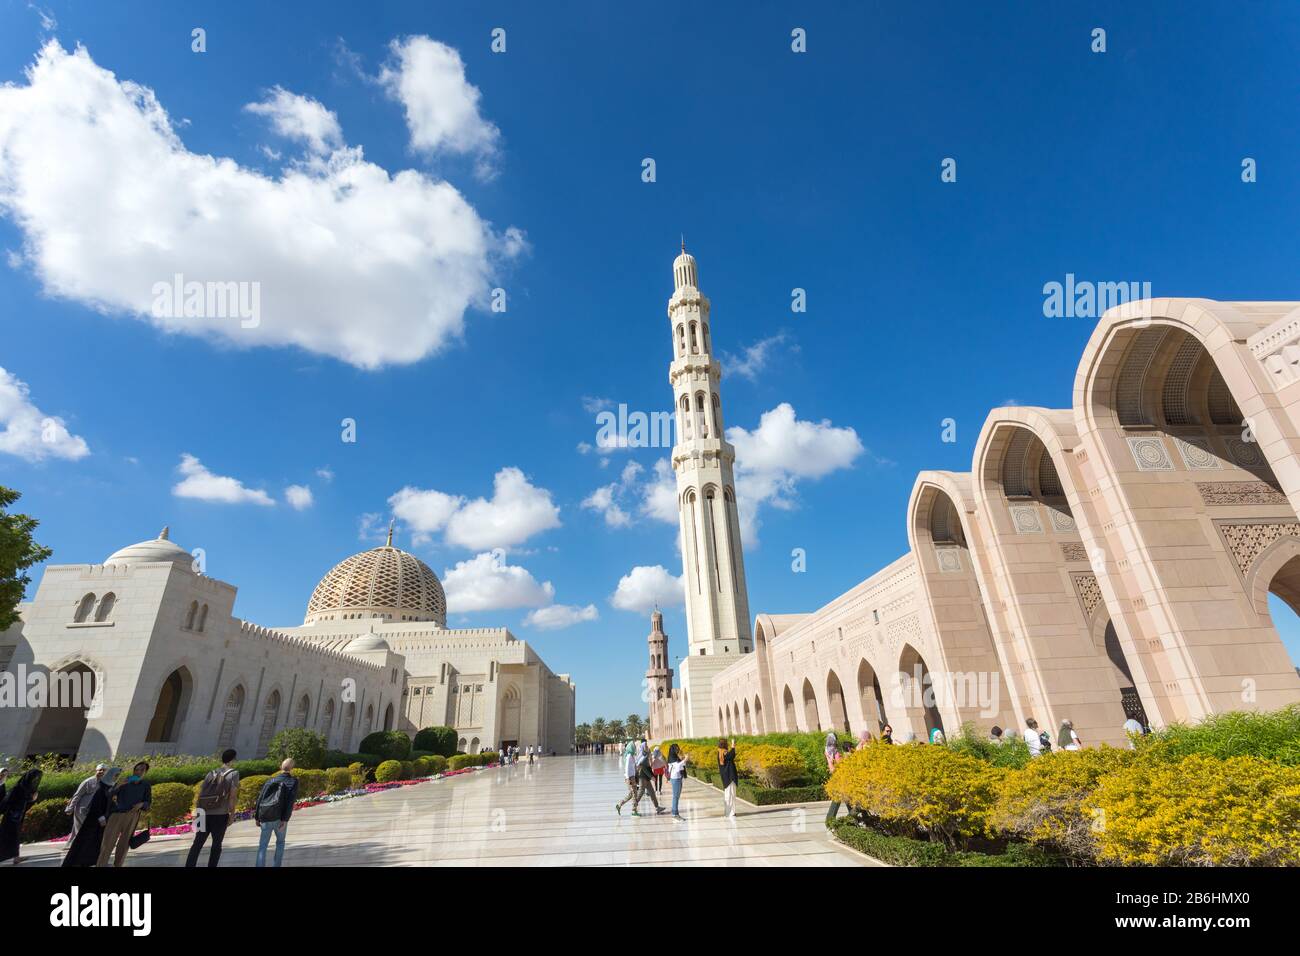 Muscat, Oman. Dec 2019: details of the Sultan Qaboos Grand Mosque. Sultanate of Oman. Stock Photo